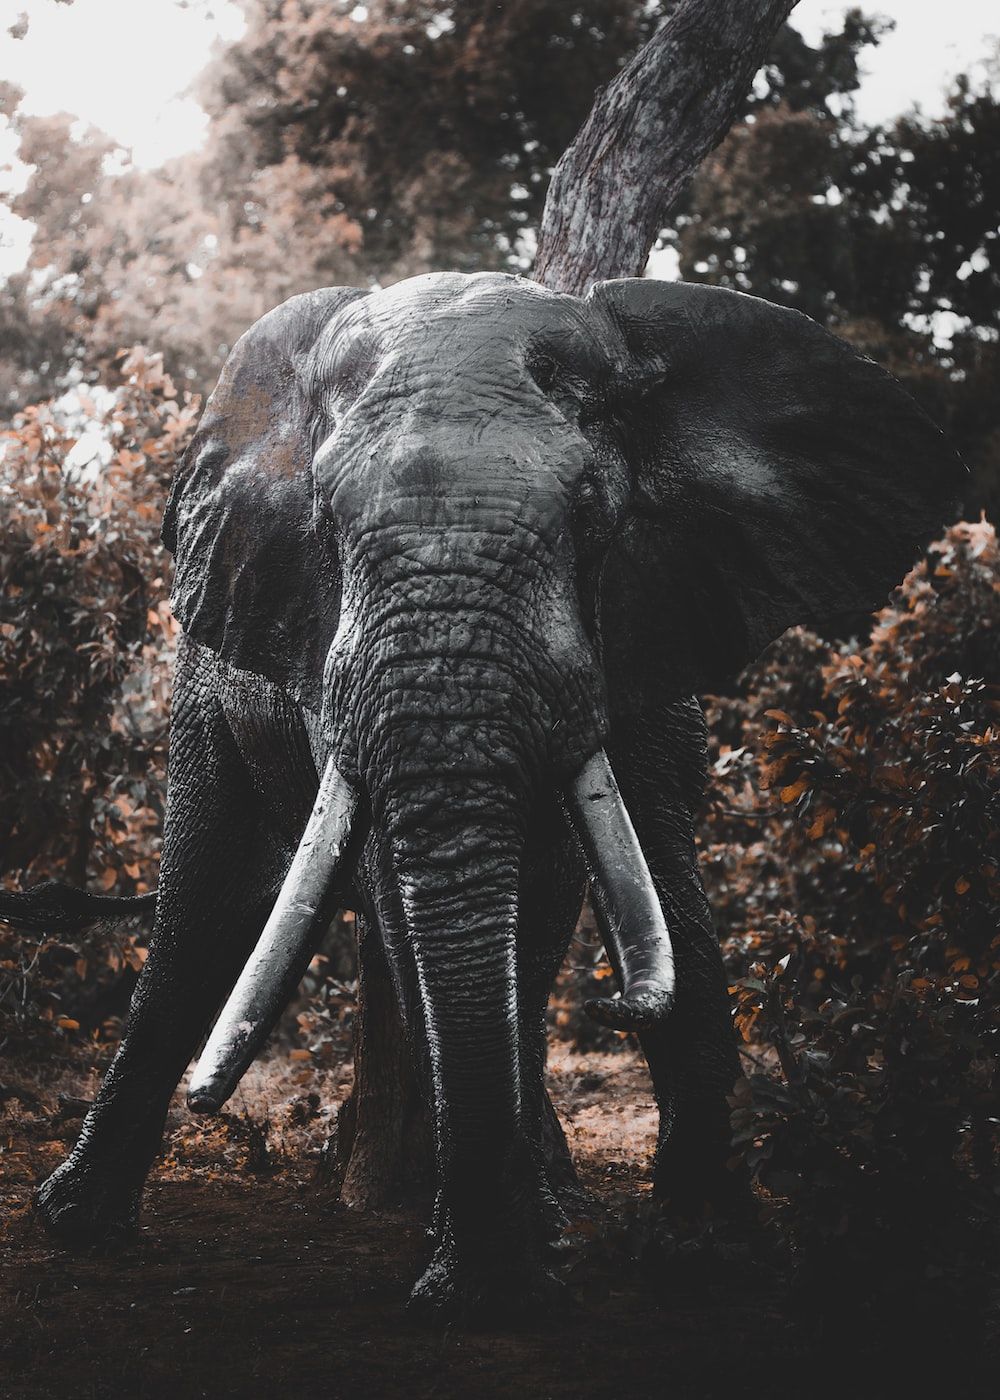 An elephant walking in the forest - Elephant